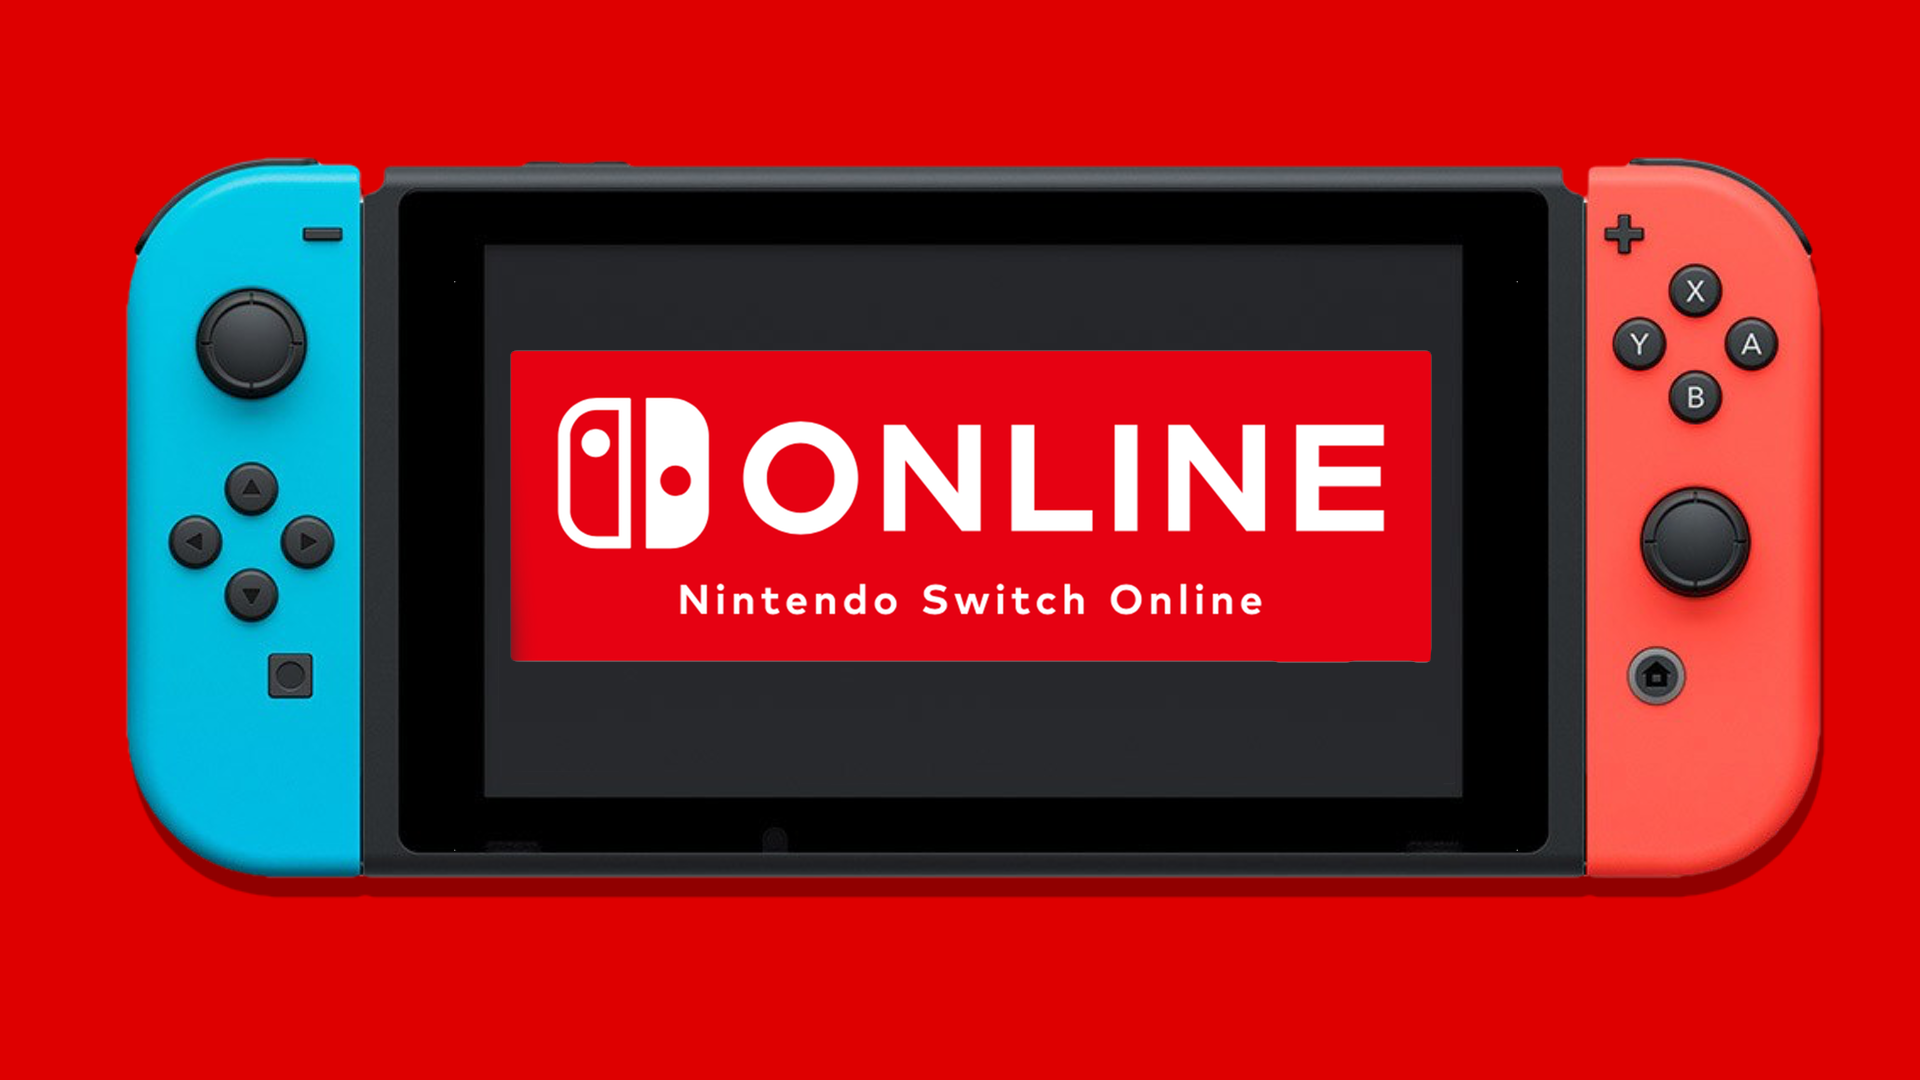 Nintendo gives more details on switch online service